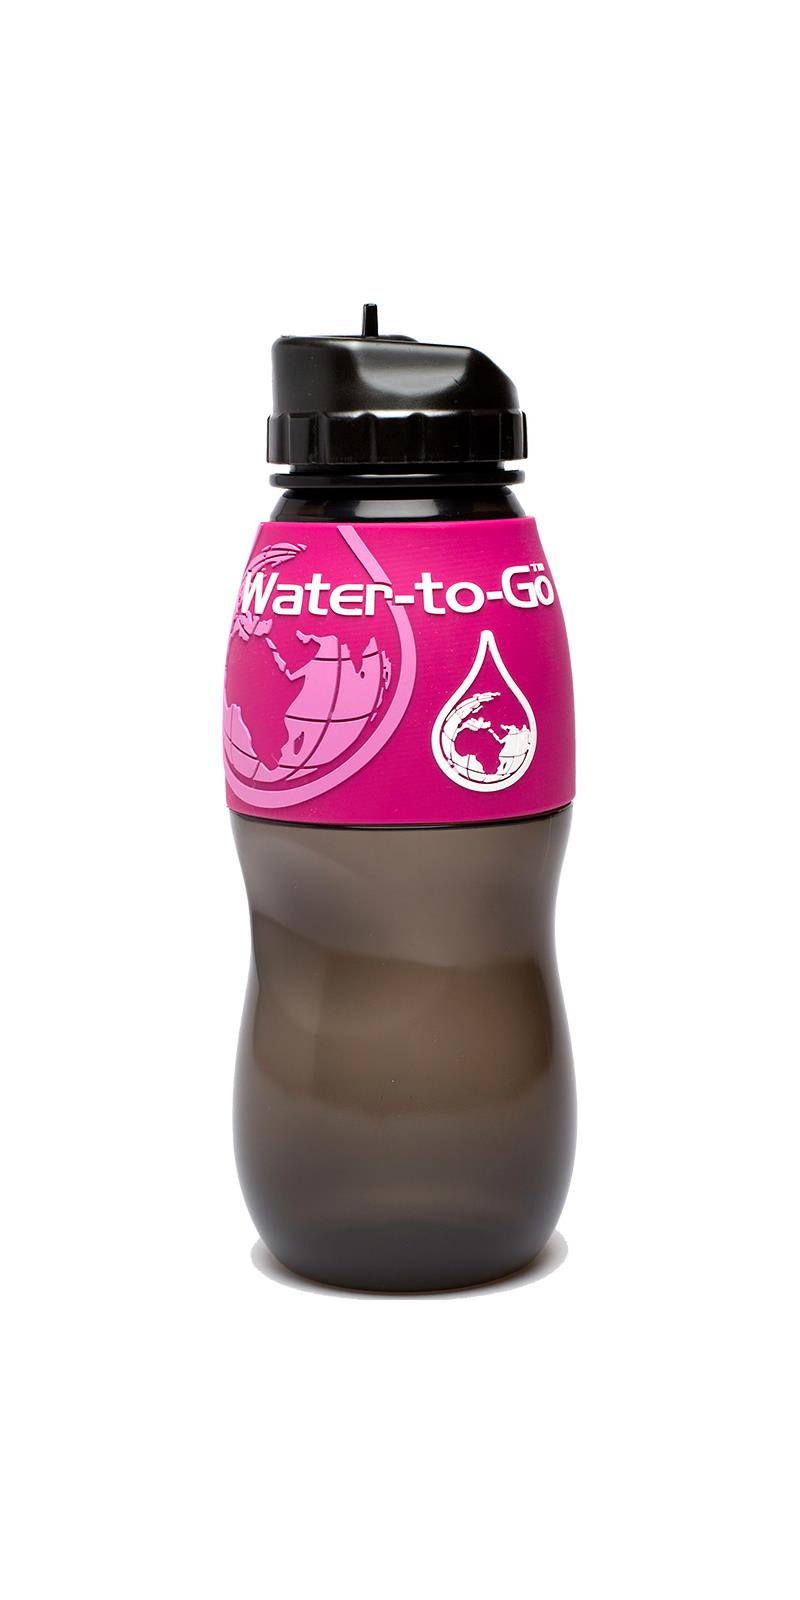 Water-to-Go 75cl Water Bottle-4